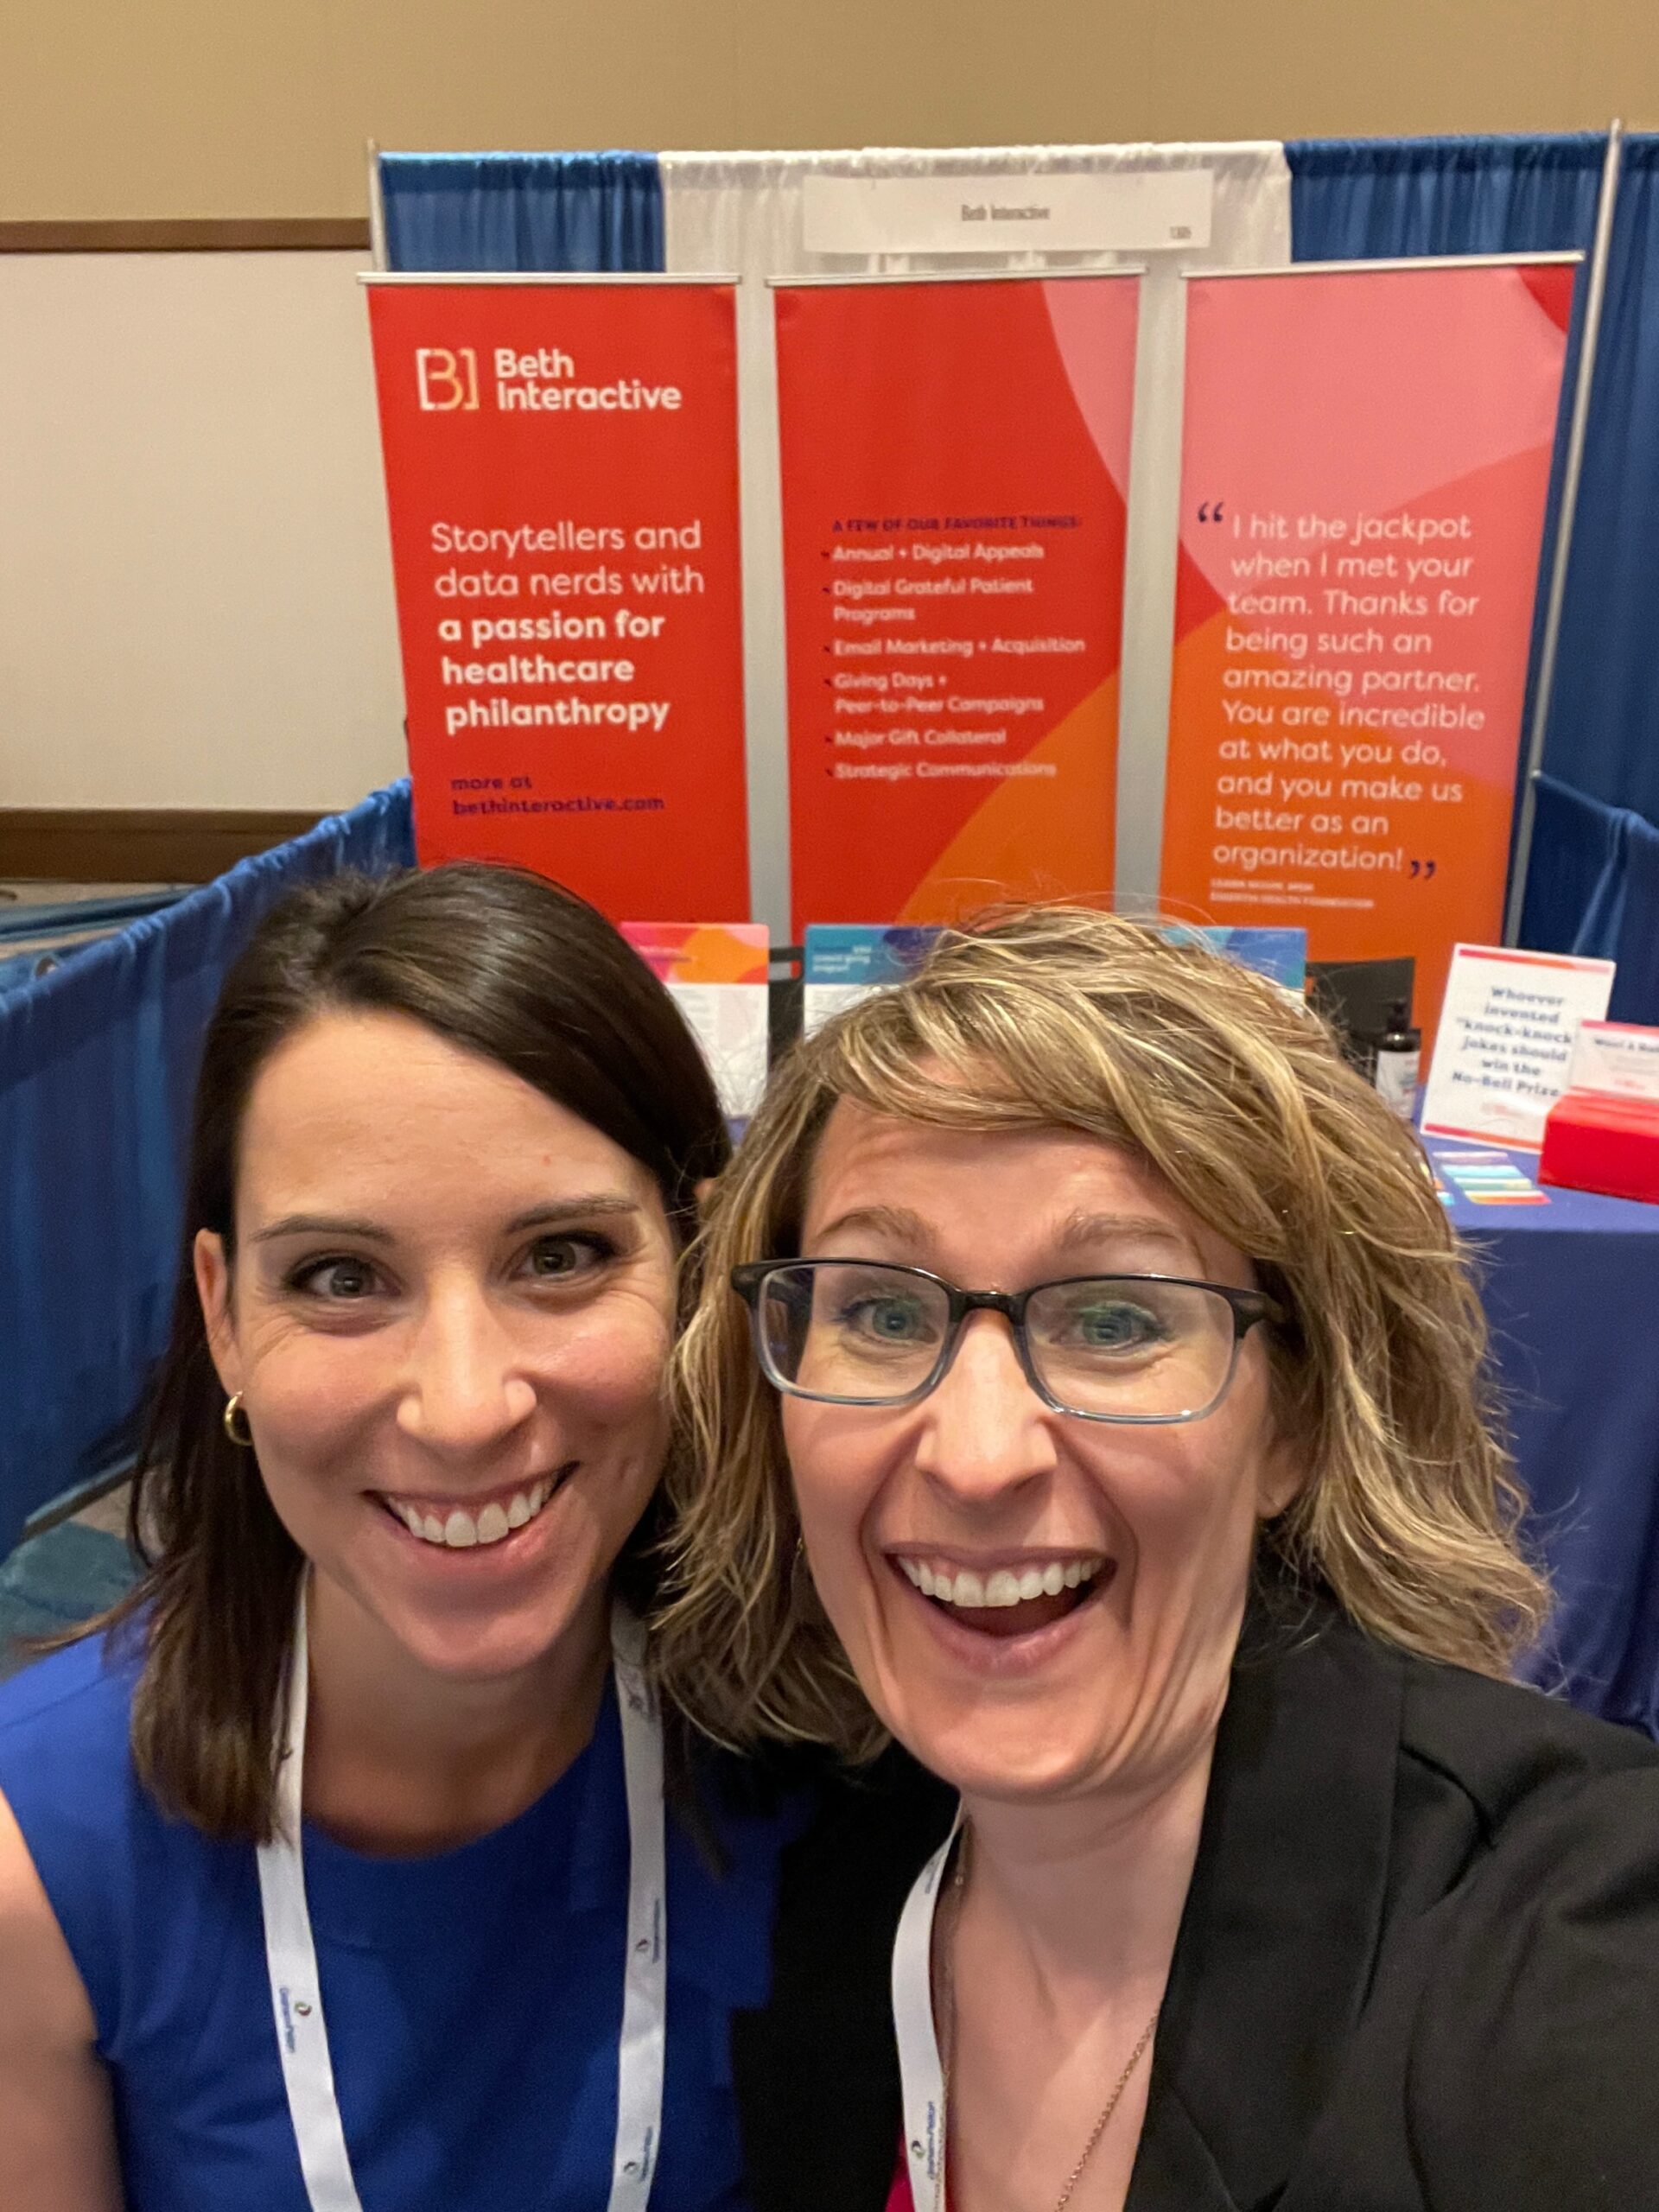 Lauren Short and Beth Hatcher welcome colleagues at the Beth Interactive booth at AHP